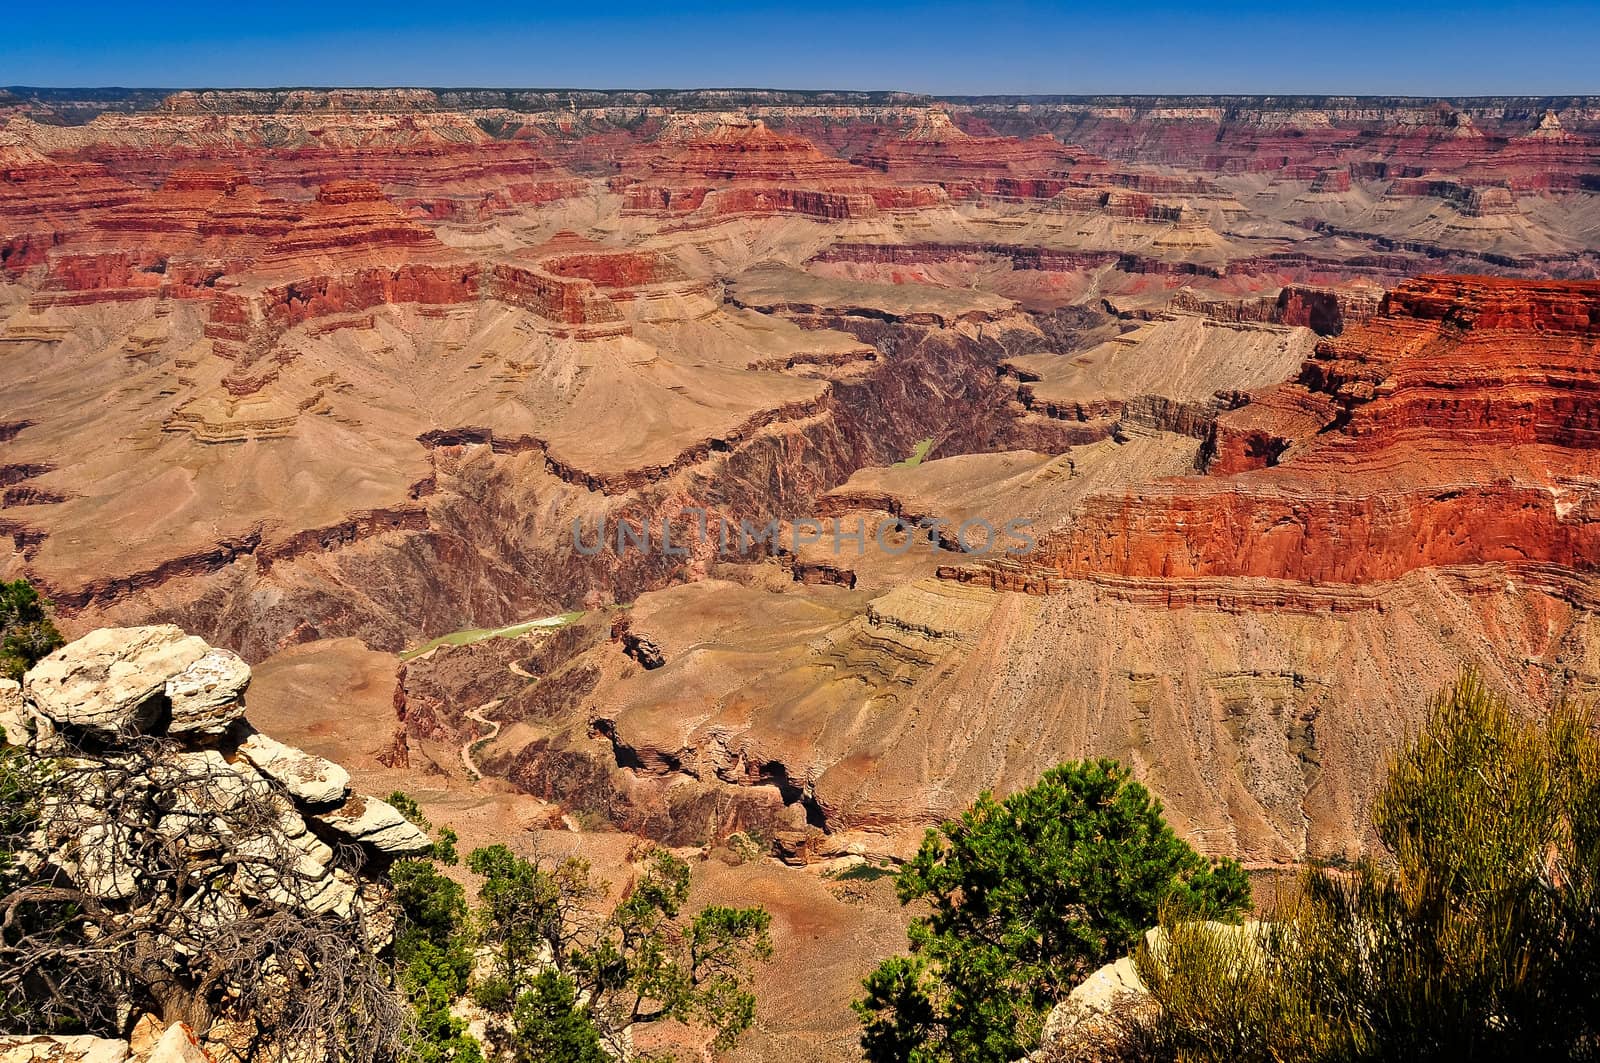 Grand canyon national park landscape view by martinm303